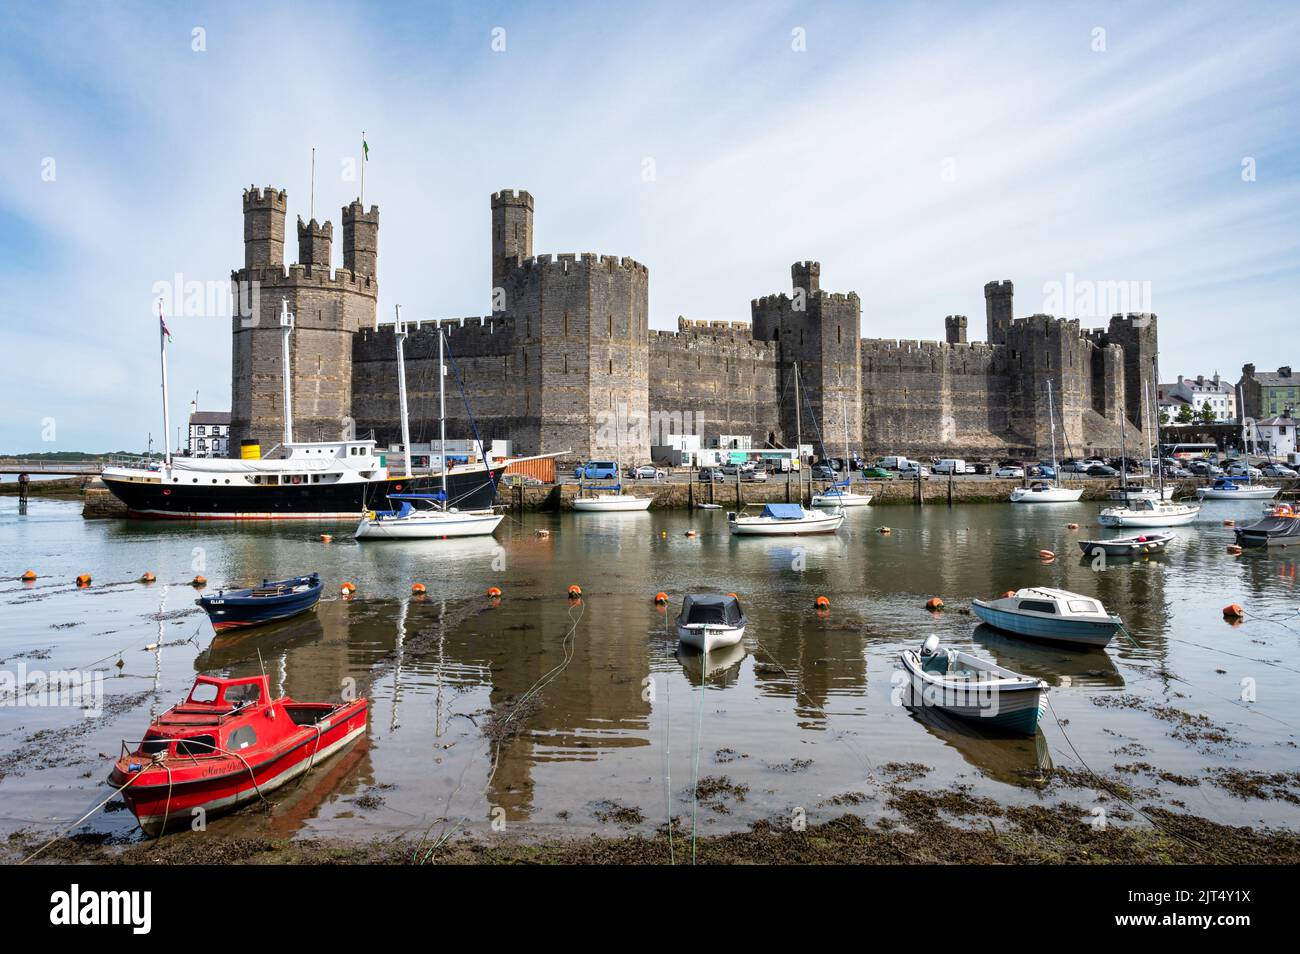 Caernarfon, UK- July 11, 2022: Fishing boats on the river Seiont in front of the medieval Castle at Caernarfon in North Wales Stock Photo